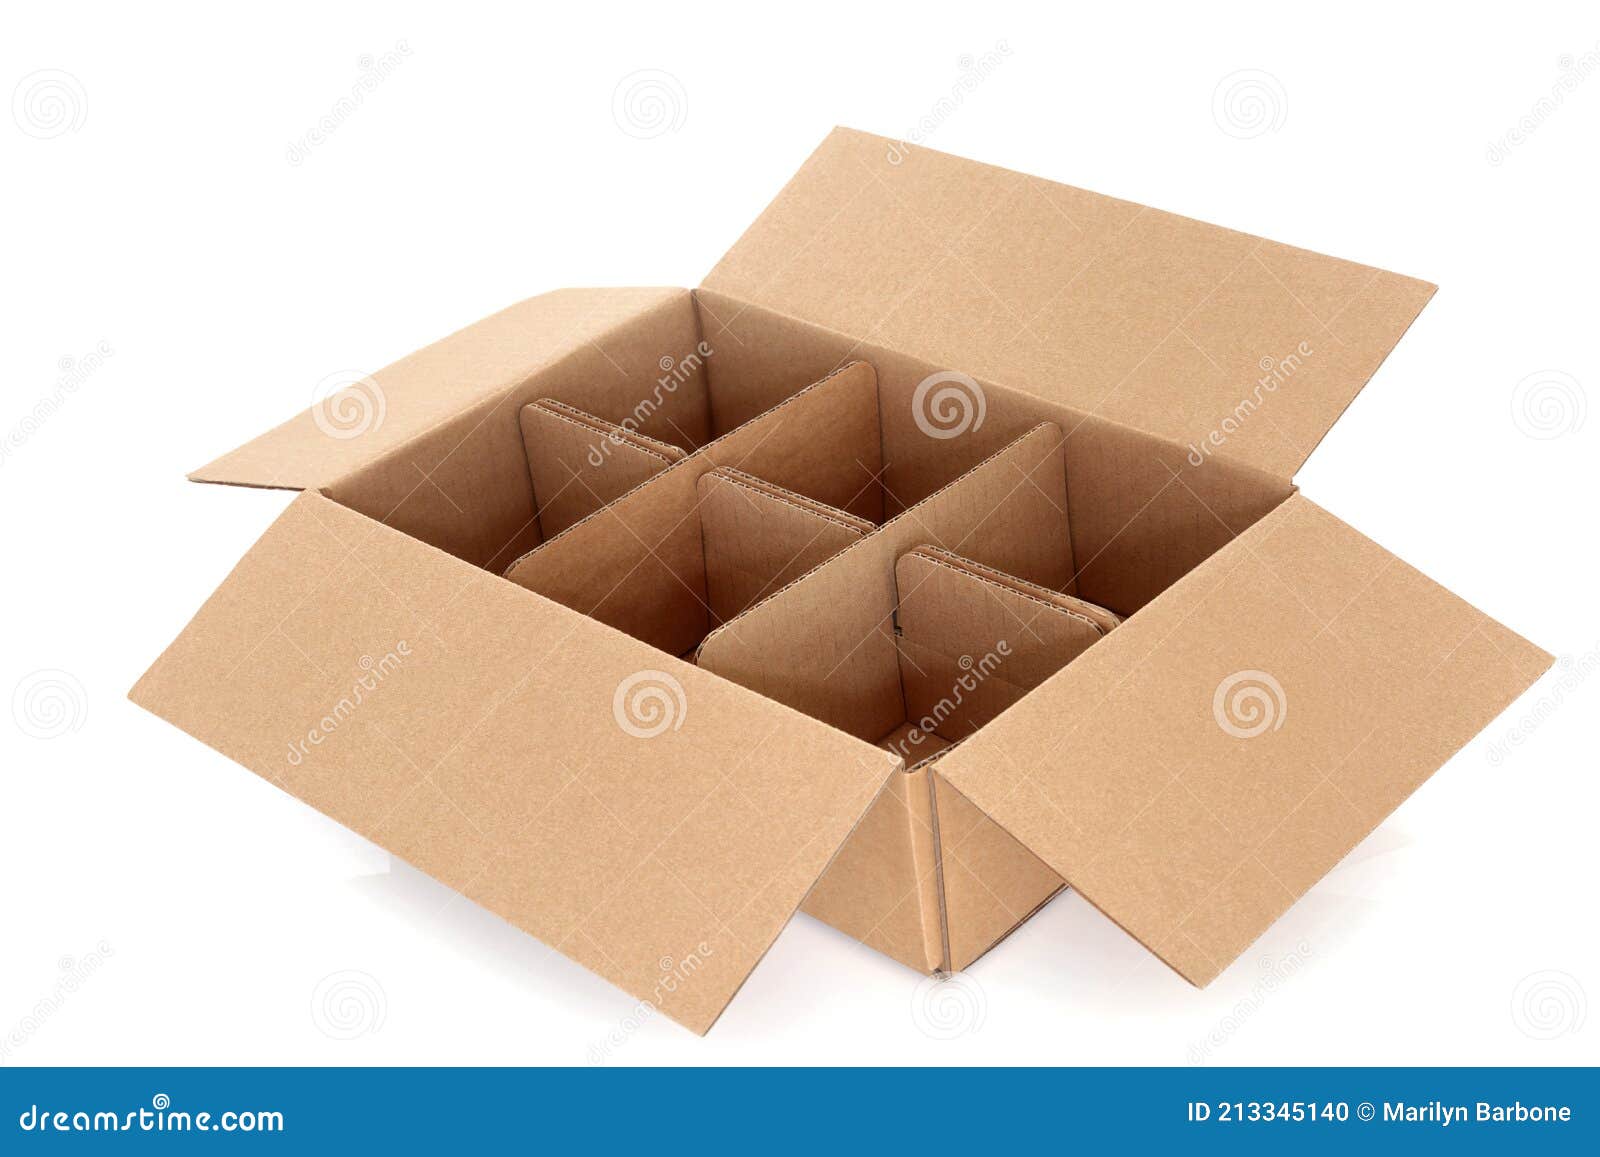 Cardboard Box with Compartments for Products Stock Photo - Image of  business, open: 213345140